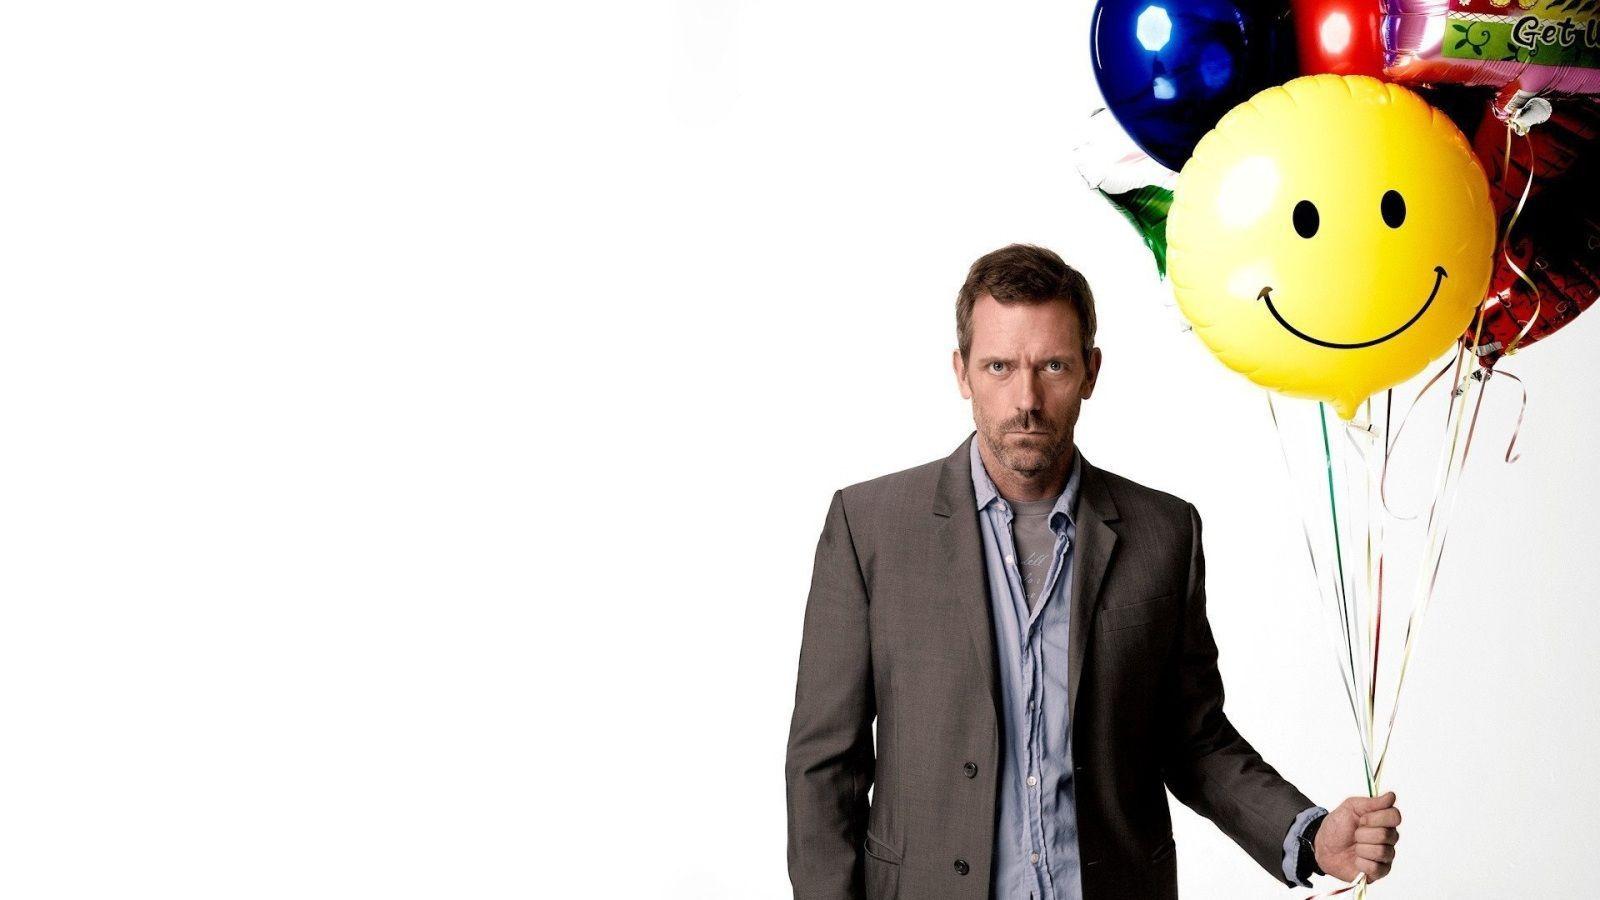 Hugh Laurie With Baloons / Good